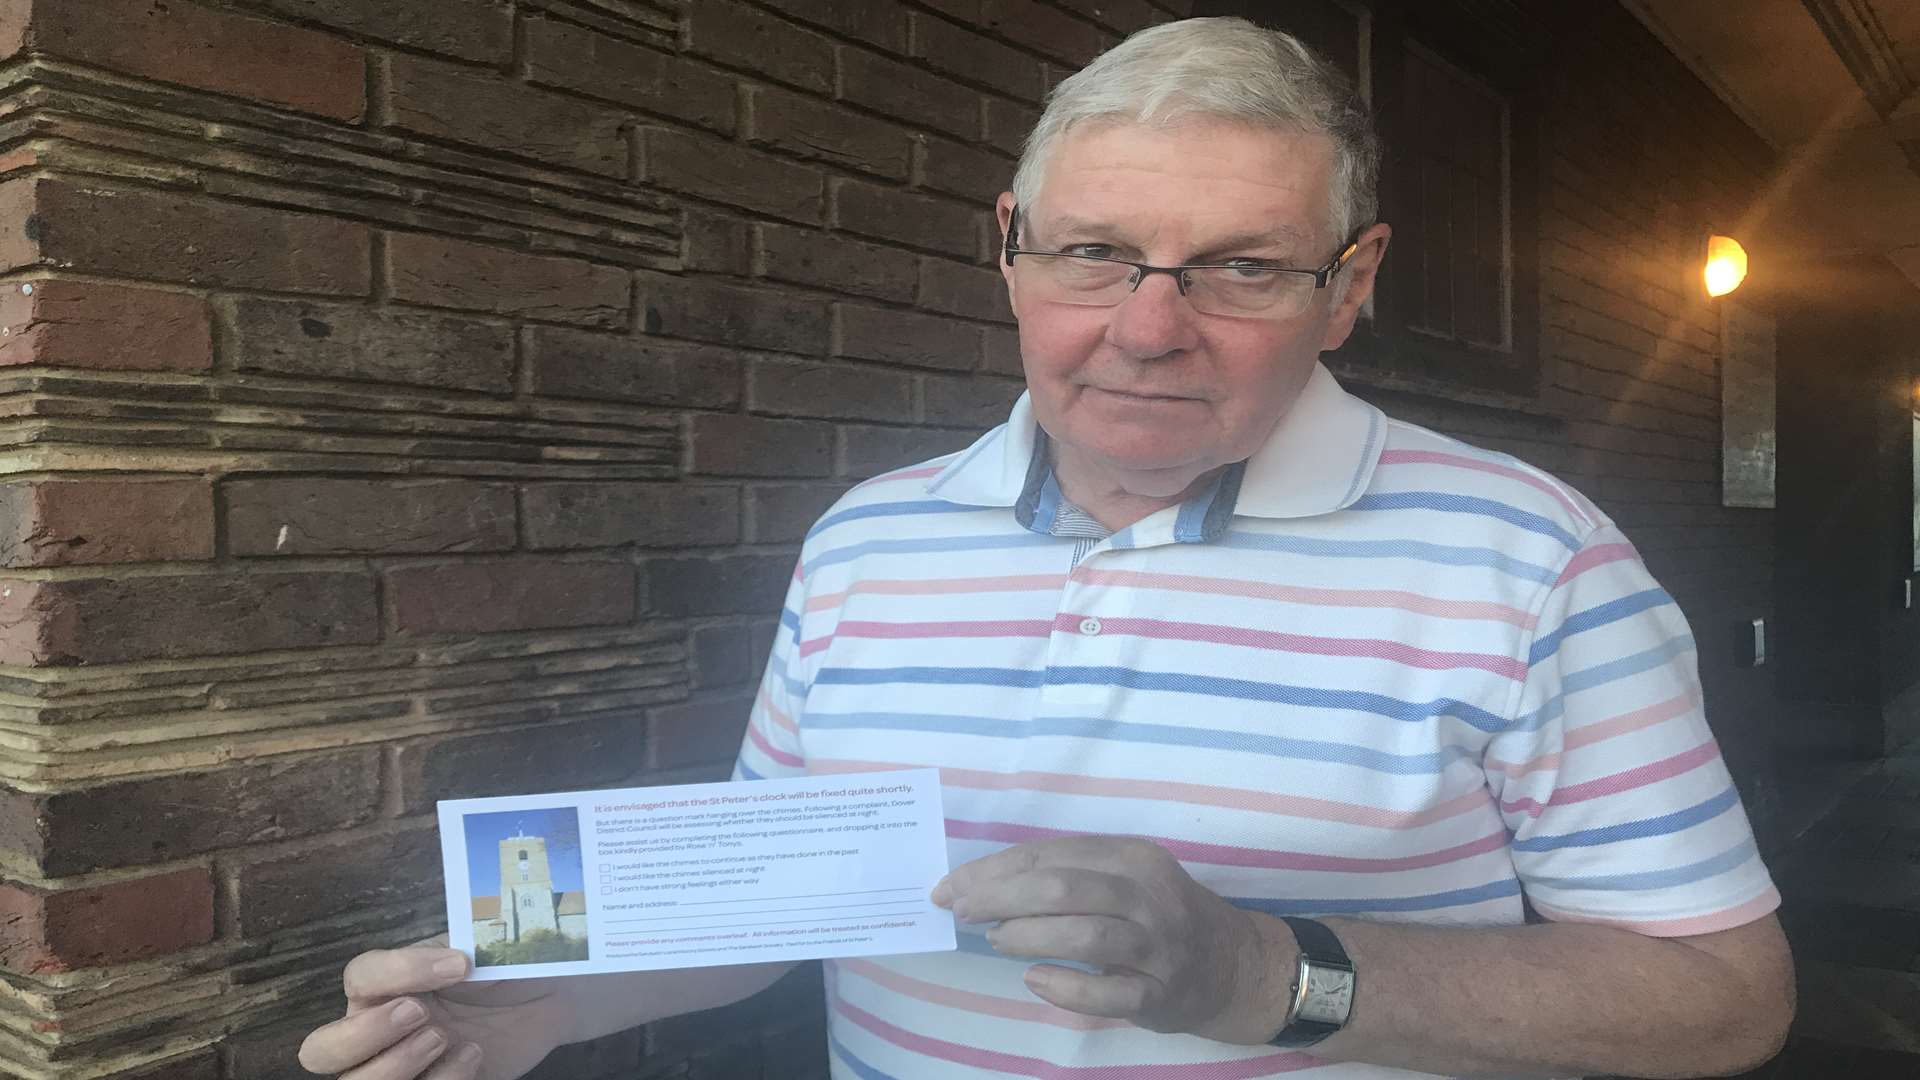 Chairman of Sandwich Local History Society John Hennessy with the survey sheet they distributed to people living in a close proximity to the clock